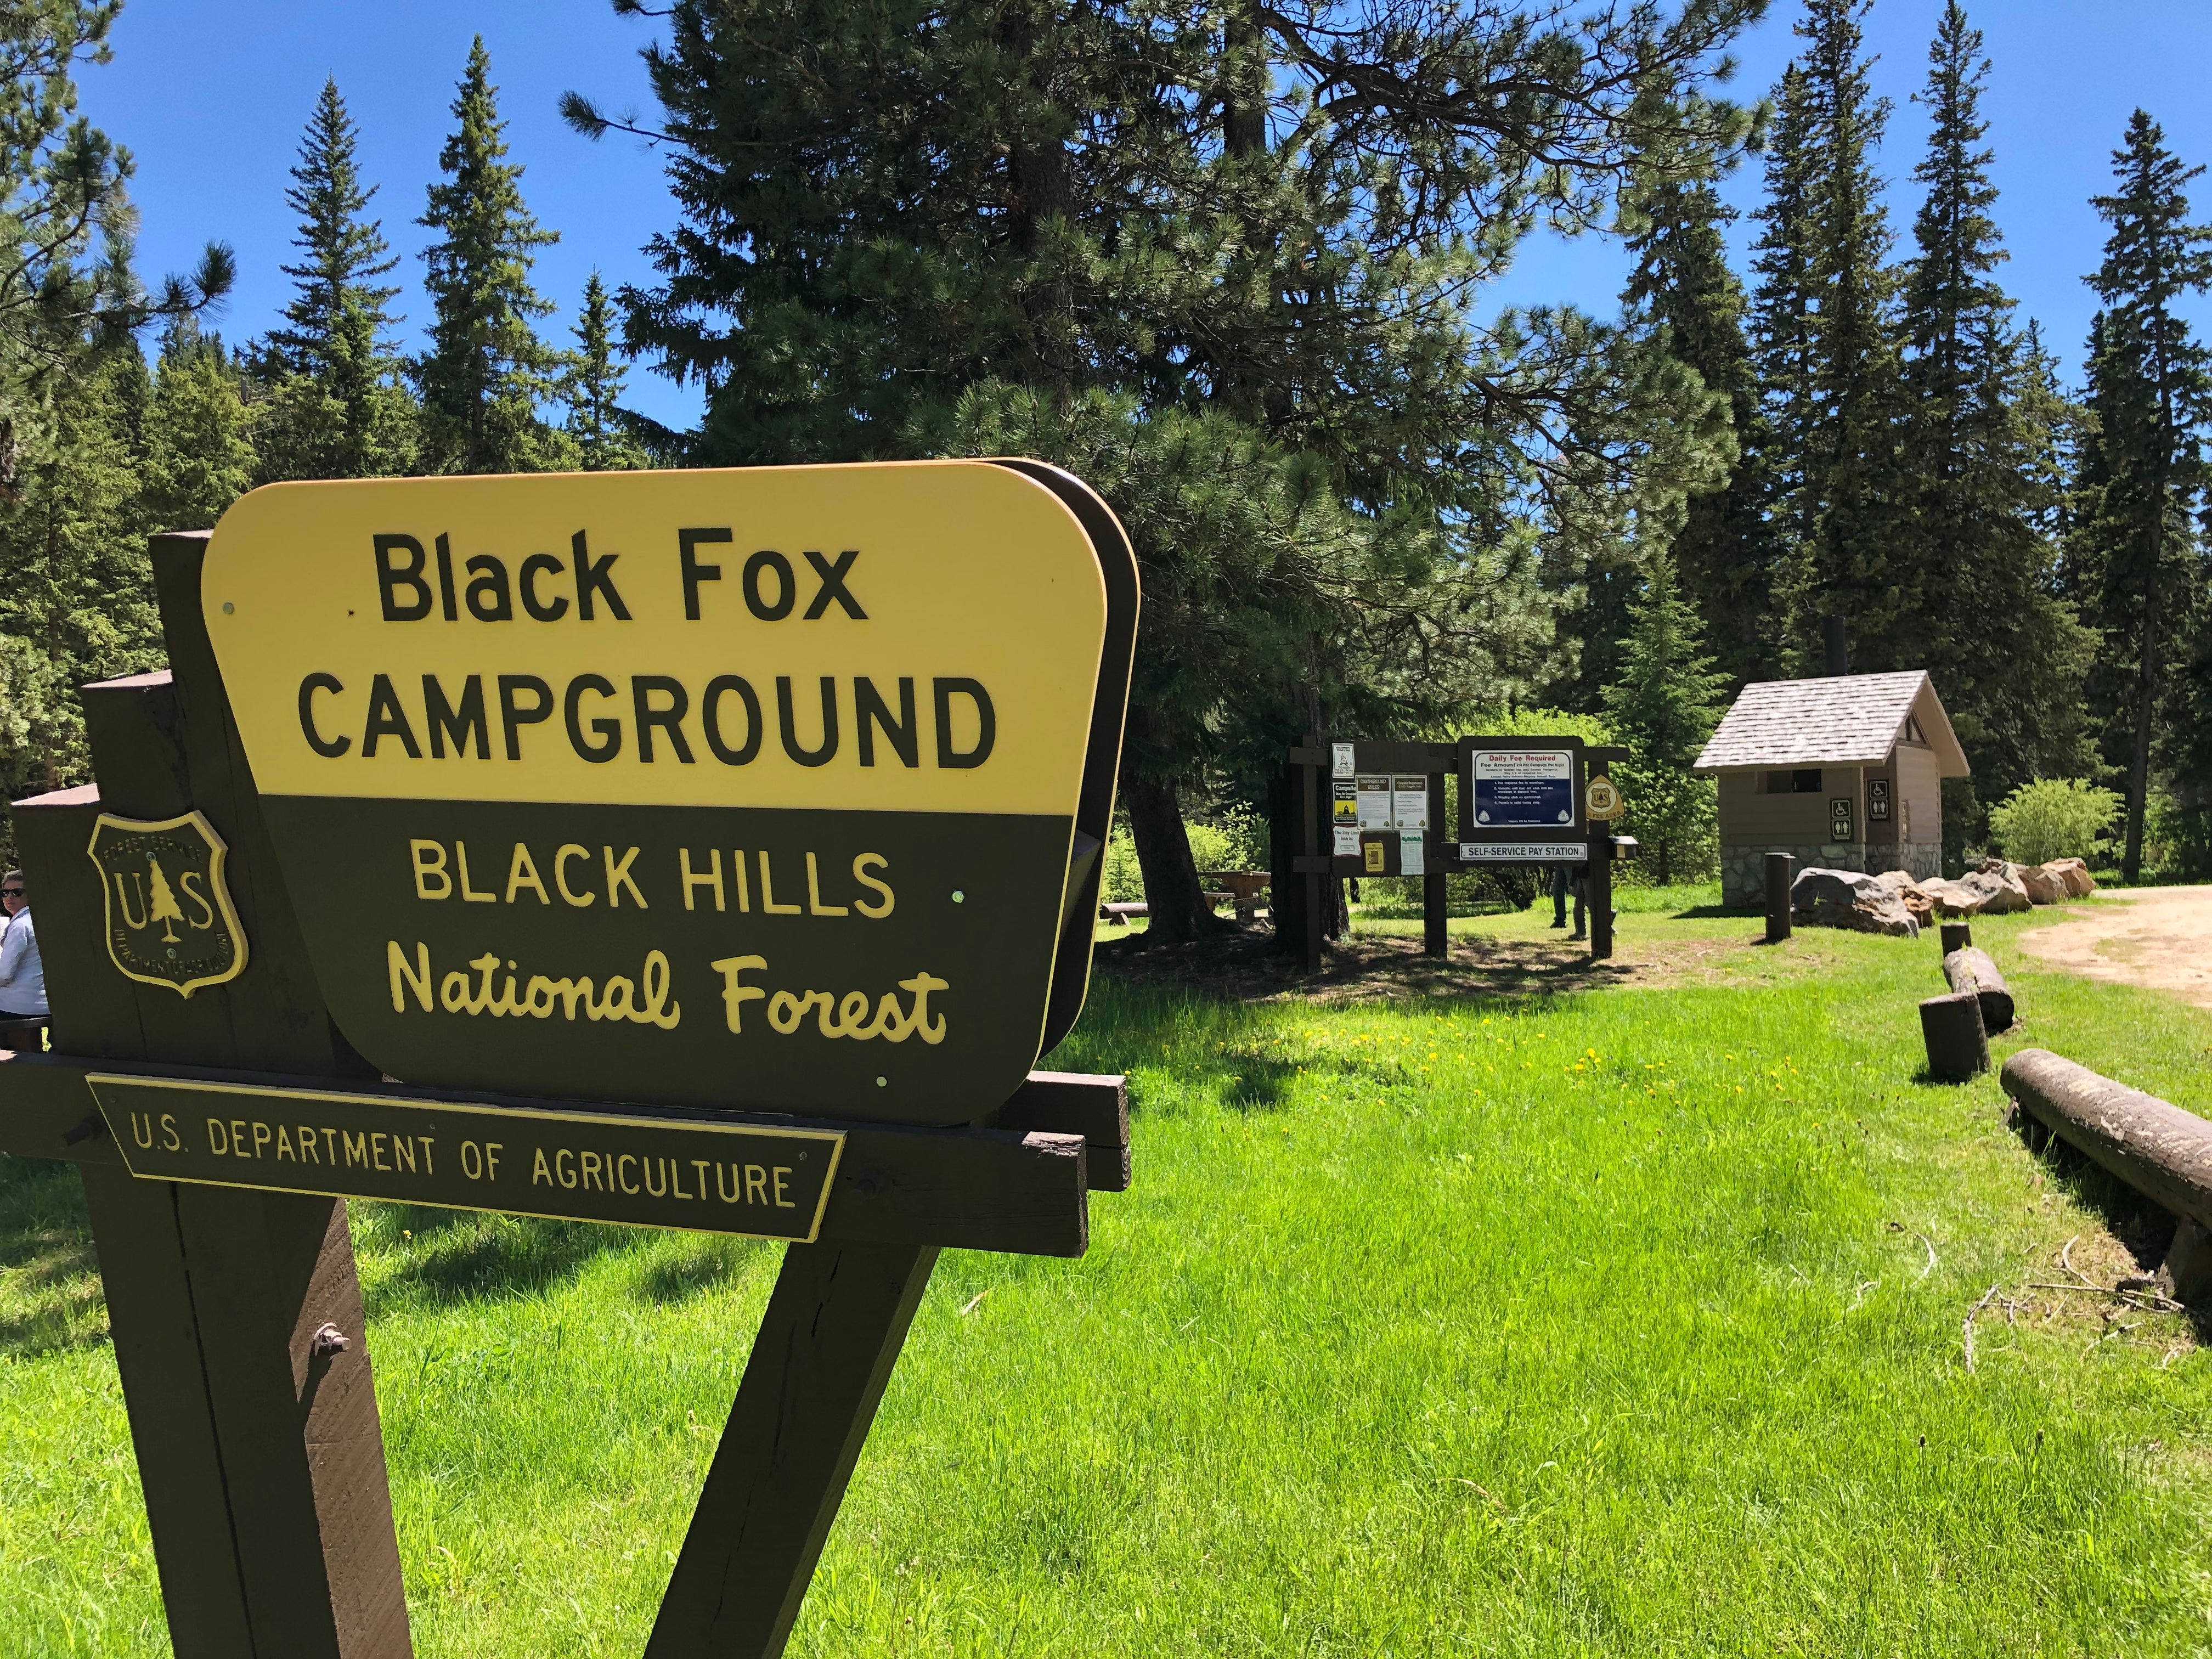 Camper submitted image from Black Fox Campground - 2